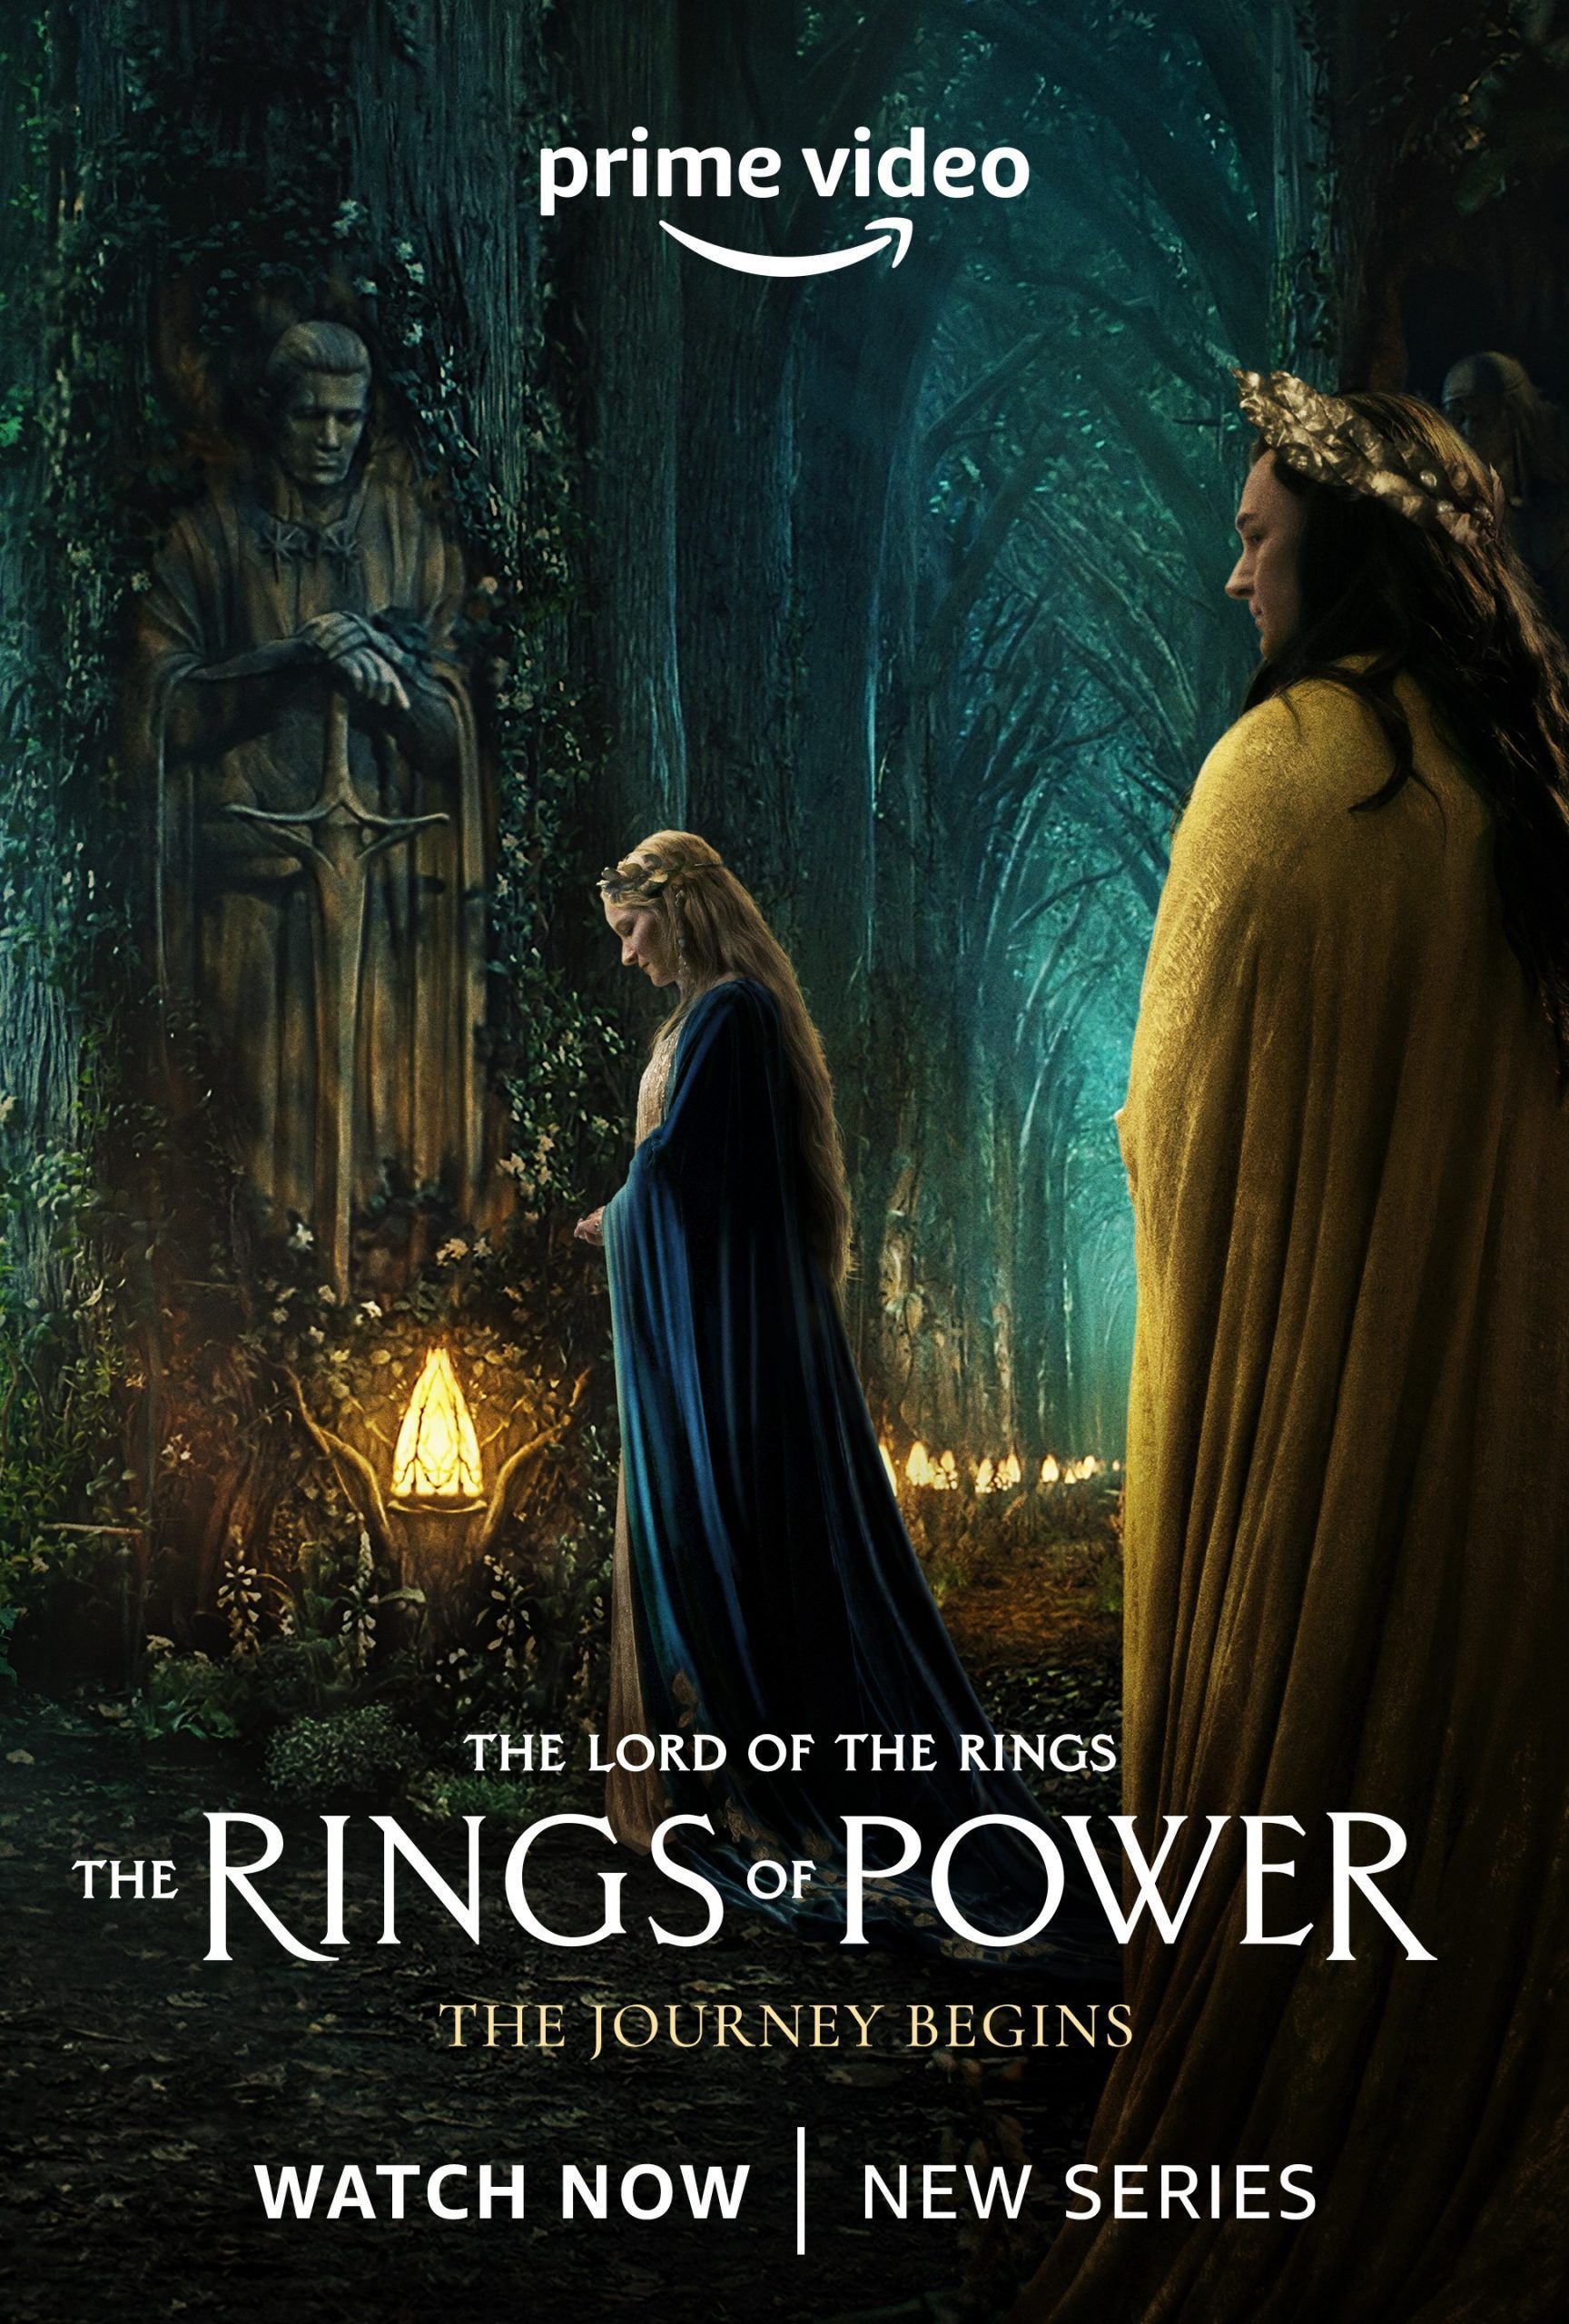 Multiculturalism in Middle-earth: On Amazon’s “The Lord of the Rings: The Rings of Power”